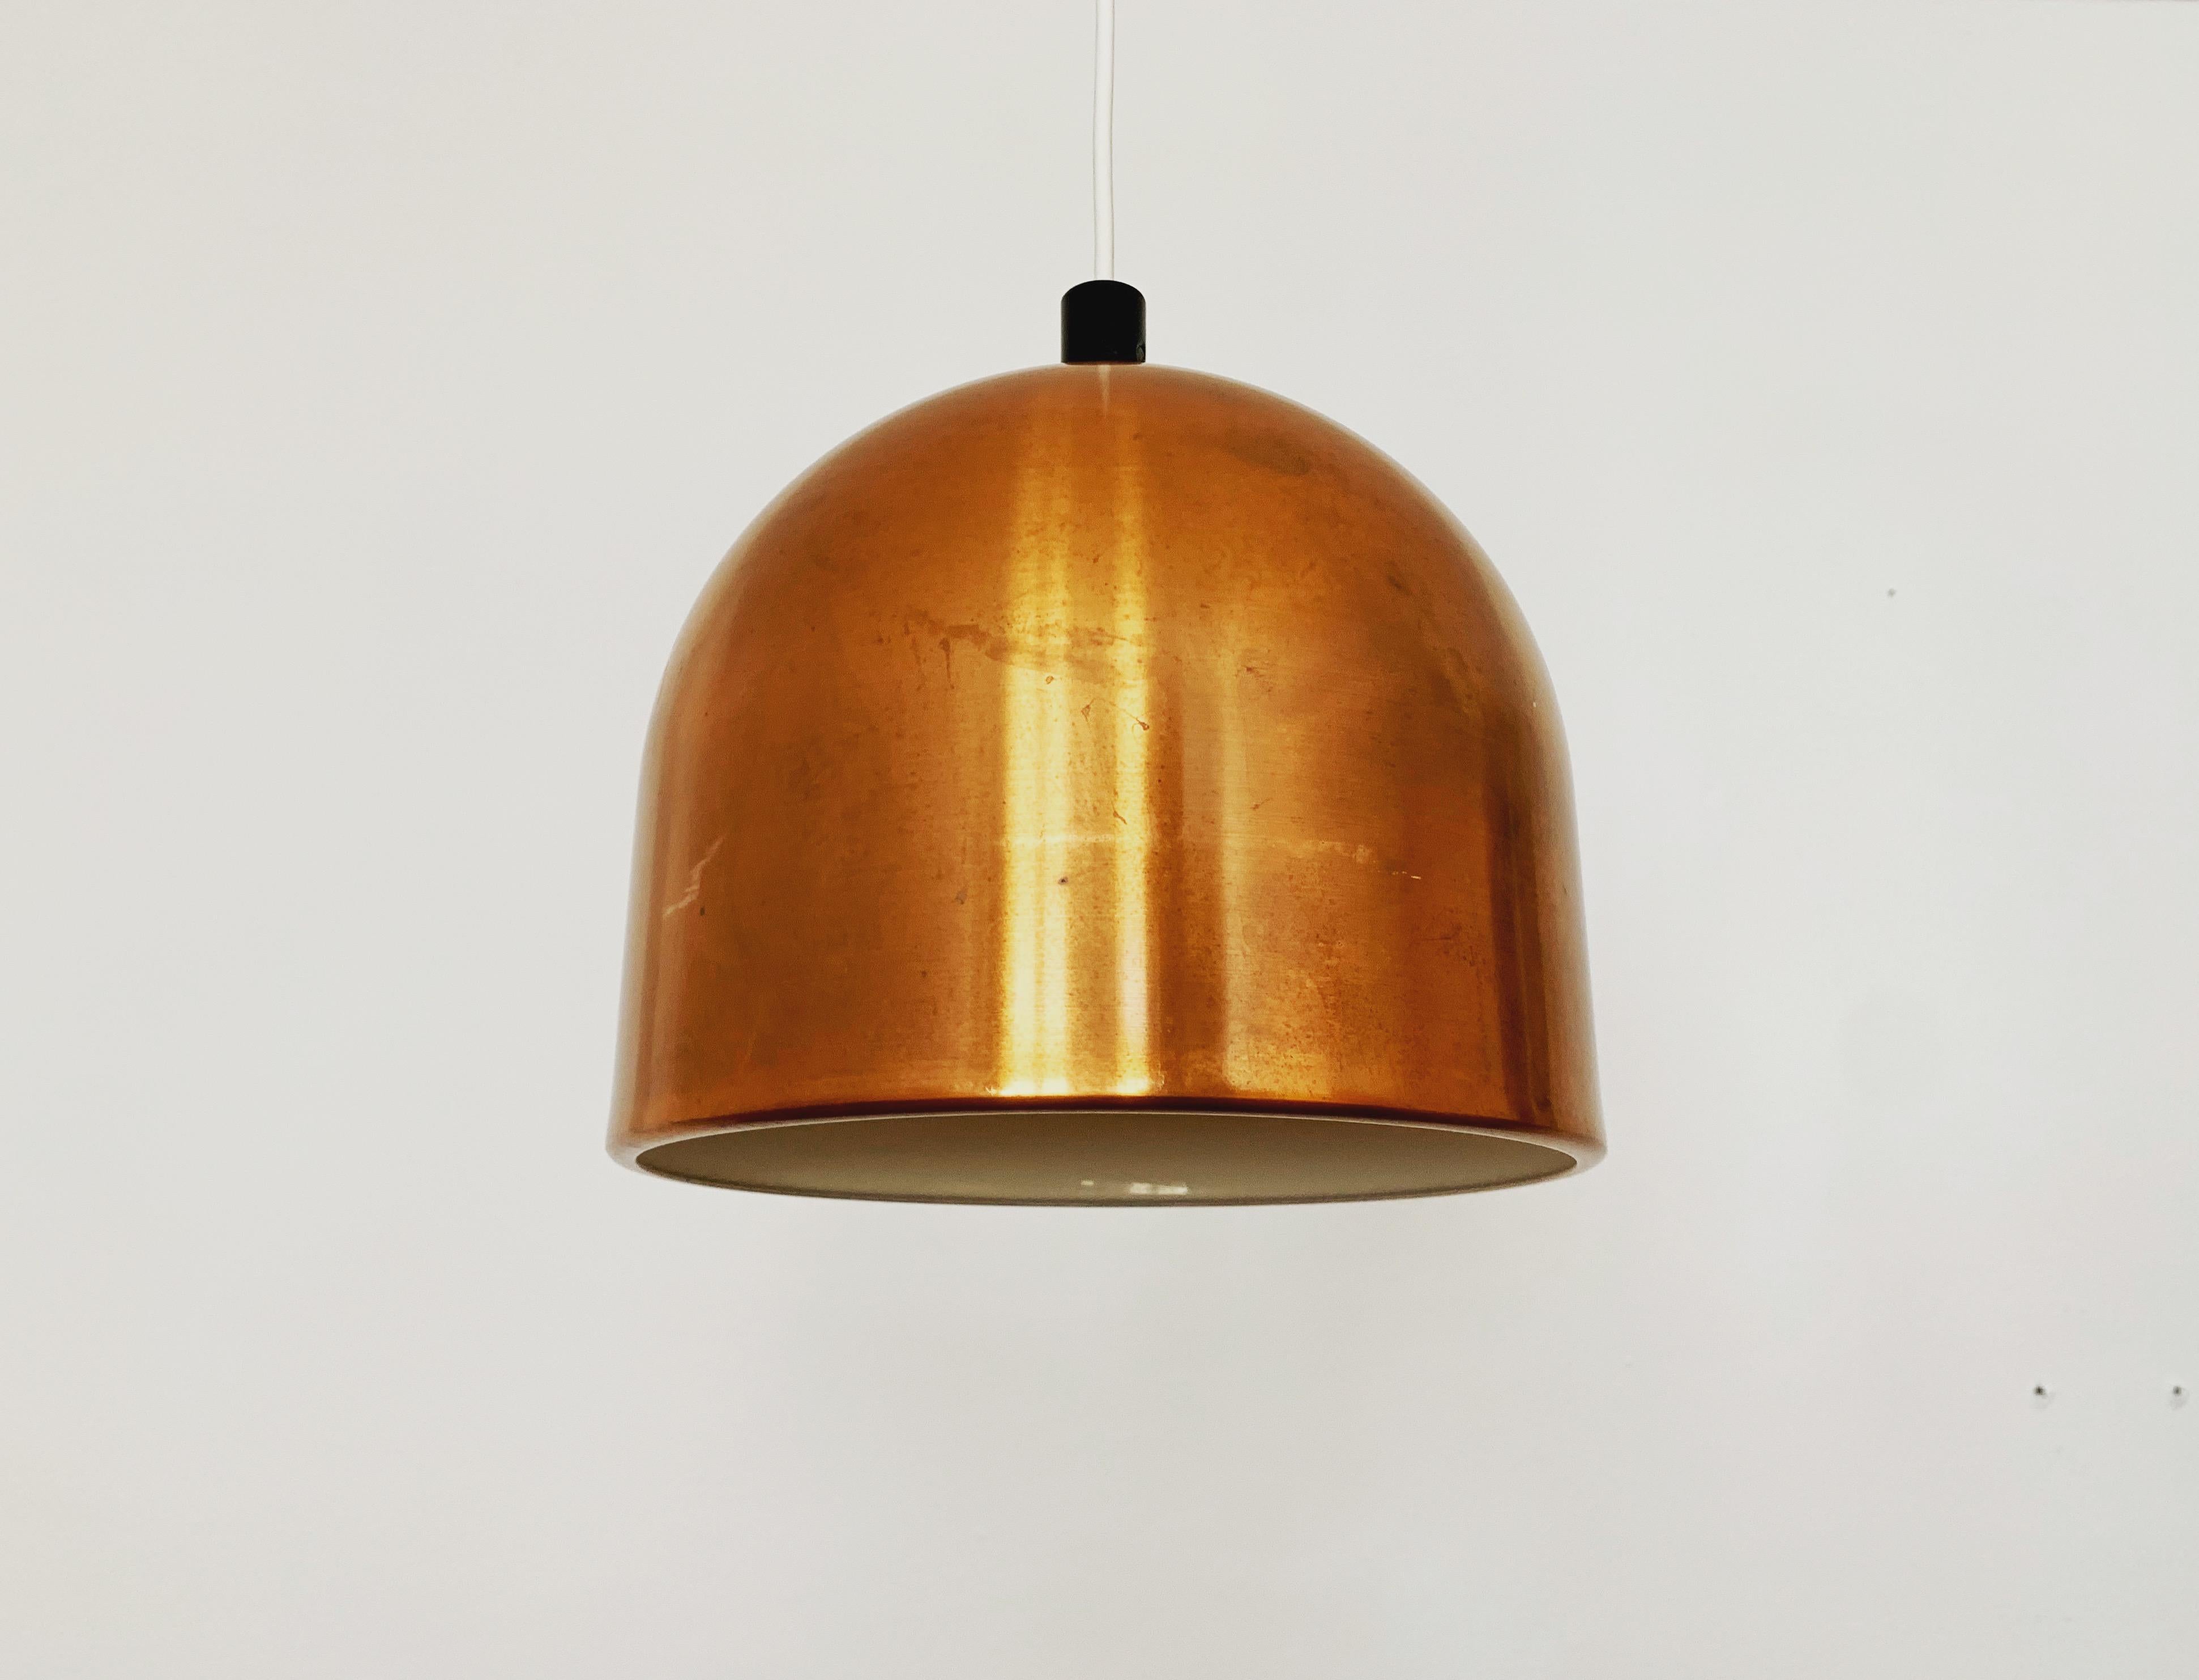 Wonderful Danish pendant lamp from the 1960s.
The very contemporary design creates a cozy atmosphere and gives off a nice warm light.
The holes in the lampshade create a very pleasant play of light on the ceiling.

Condition:

Very good